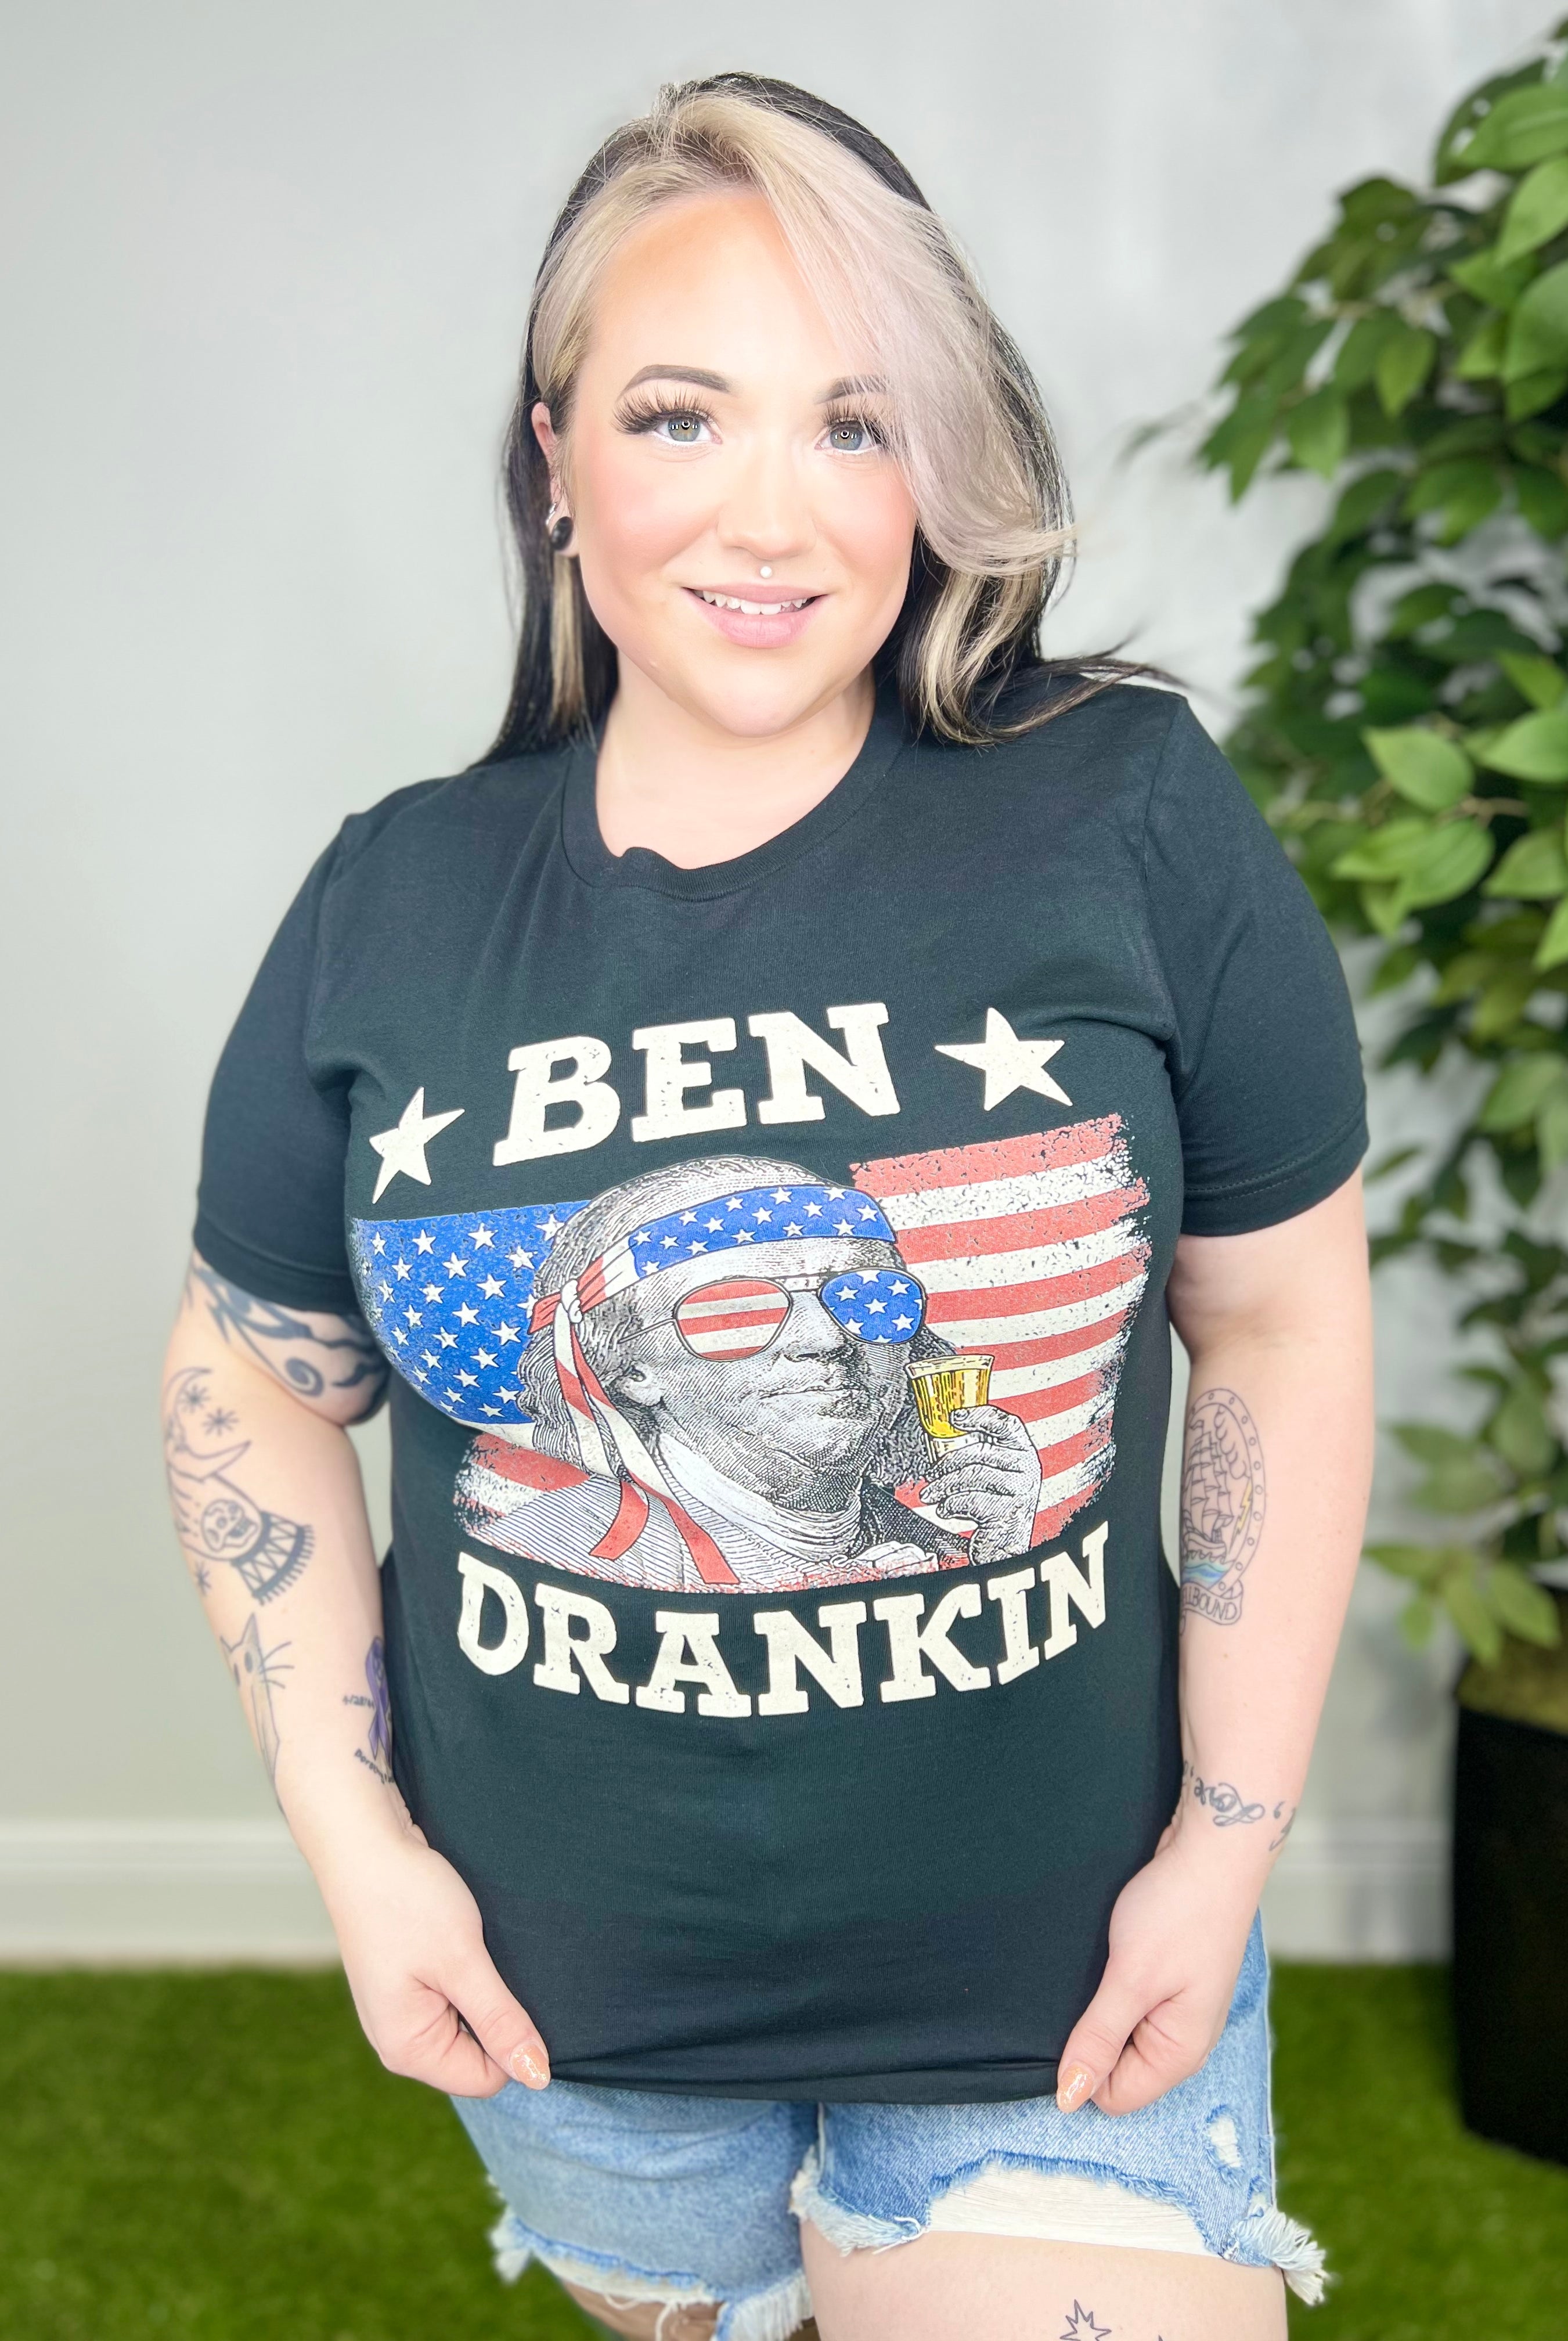 Ben Drankin' Graphic Tee-110 Short Sleeve Top-Heathered Boho-Heathered Boho Boutique, Women's Fashion and Accessories in Palmetto, FL